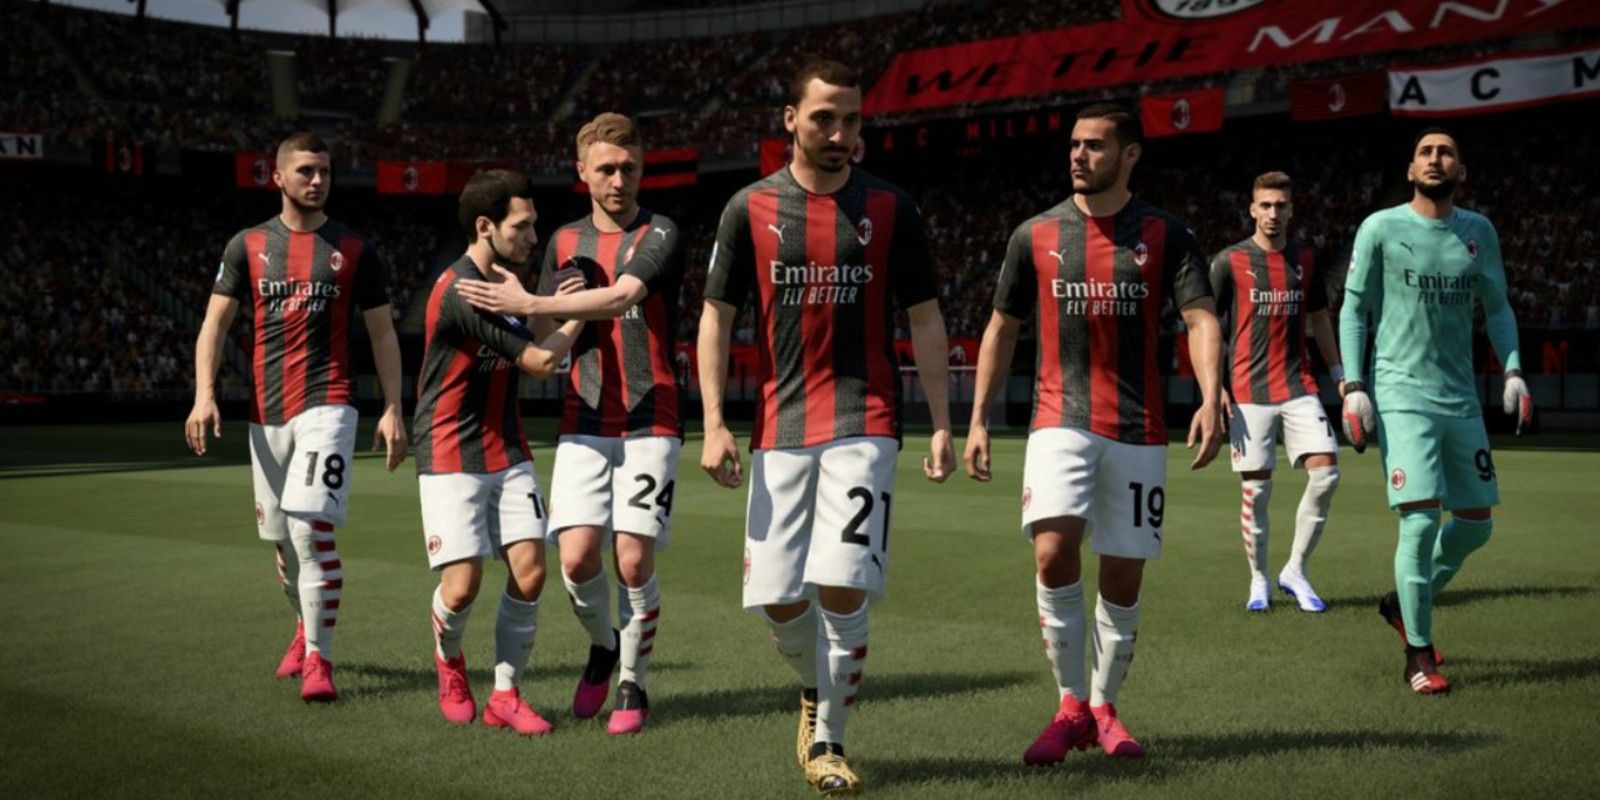 A team enters the field in FIFA 21